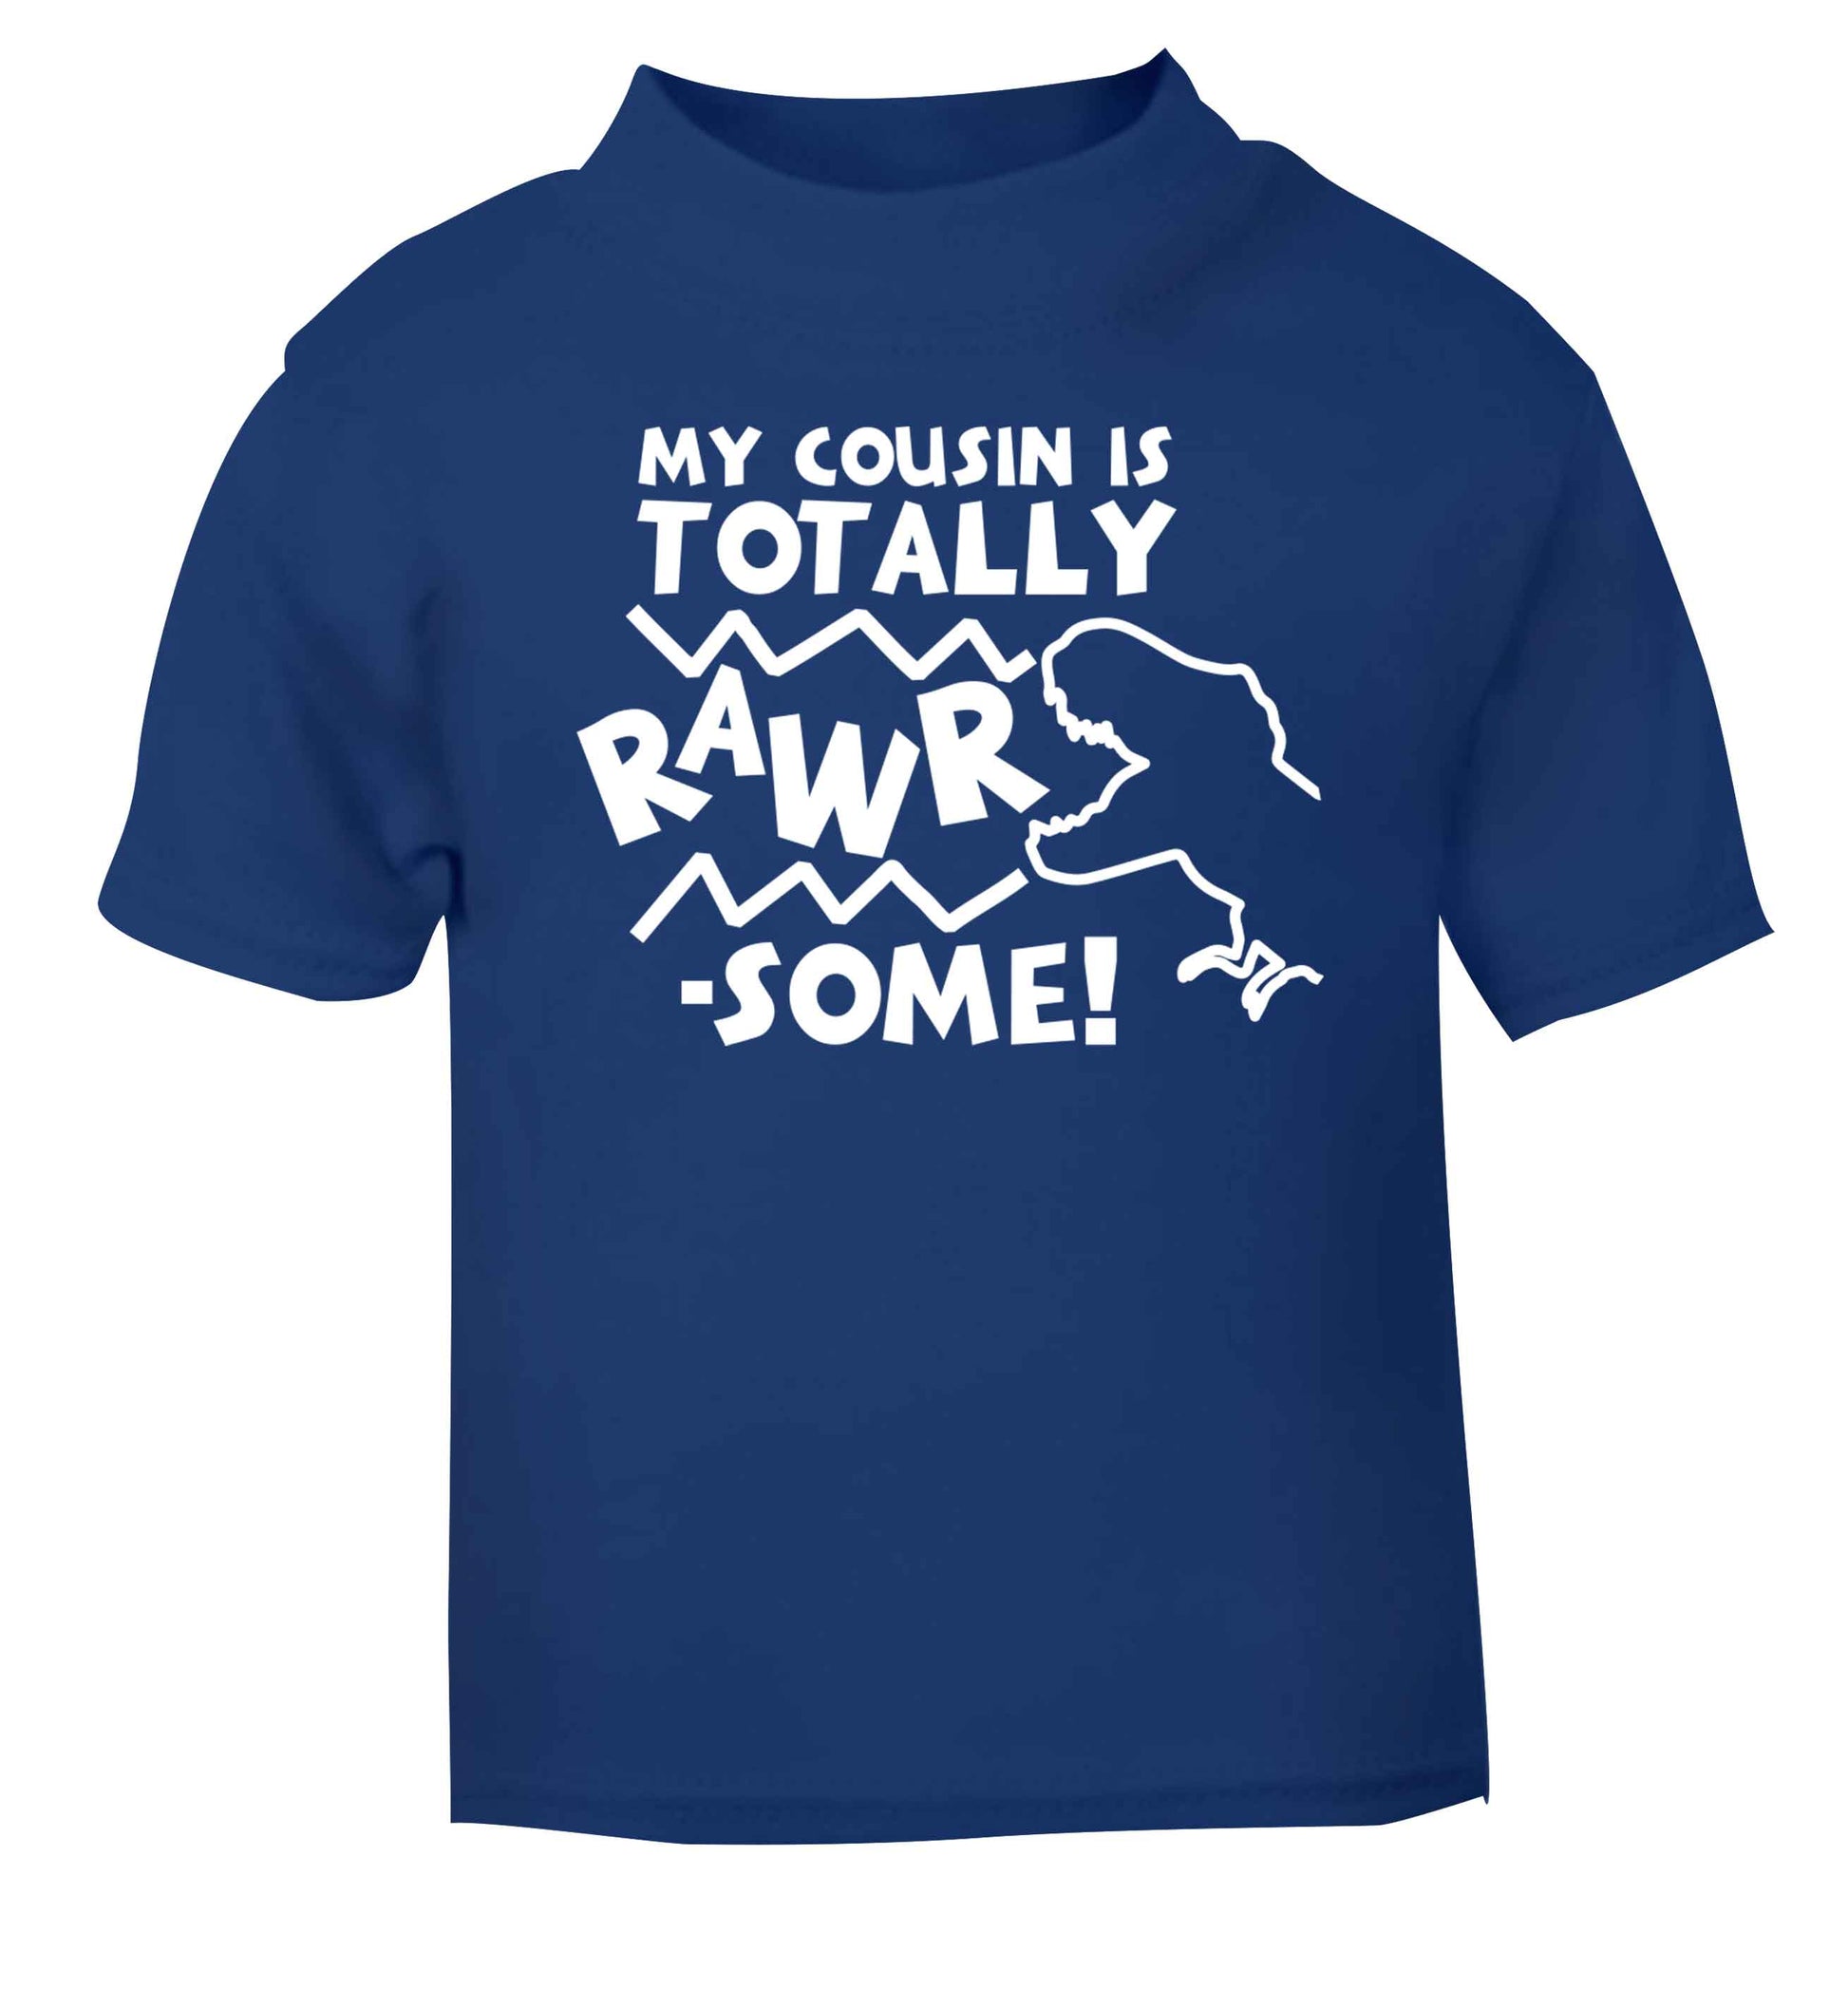 My cousin is totally rawrsome blue baby toddler Tshirt 2 Years